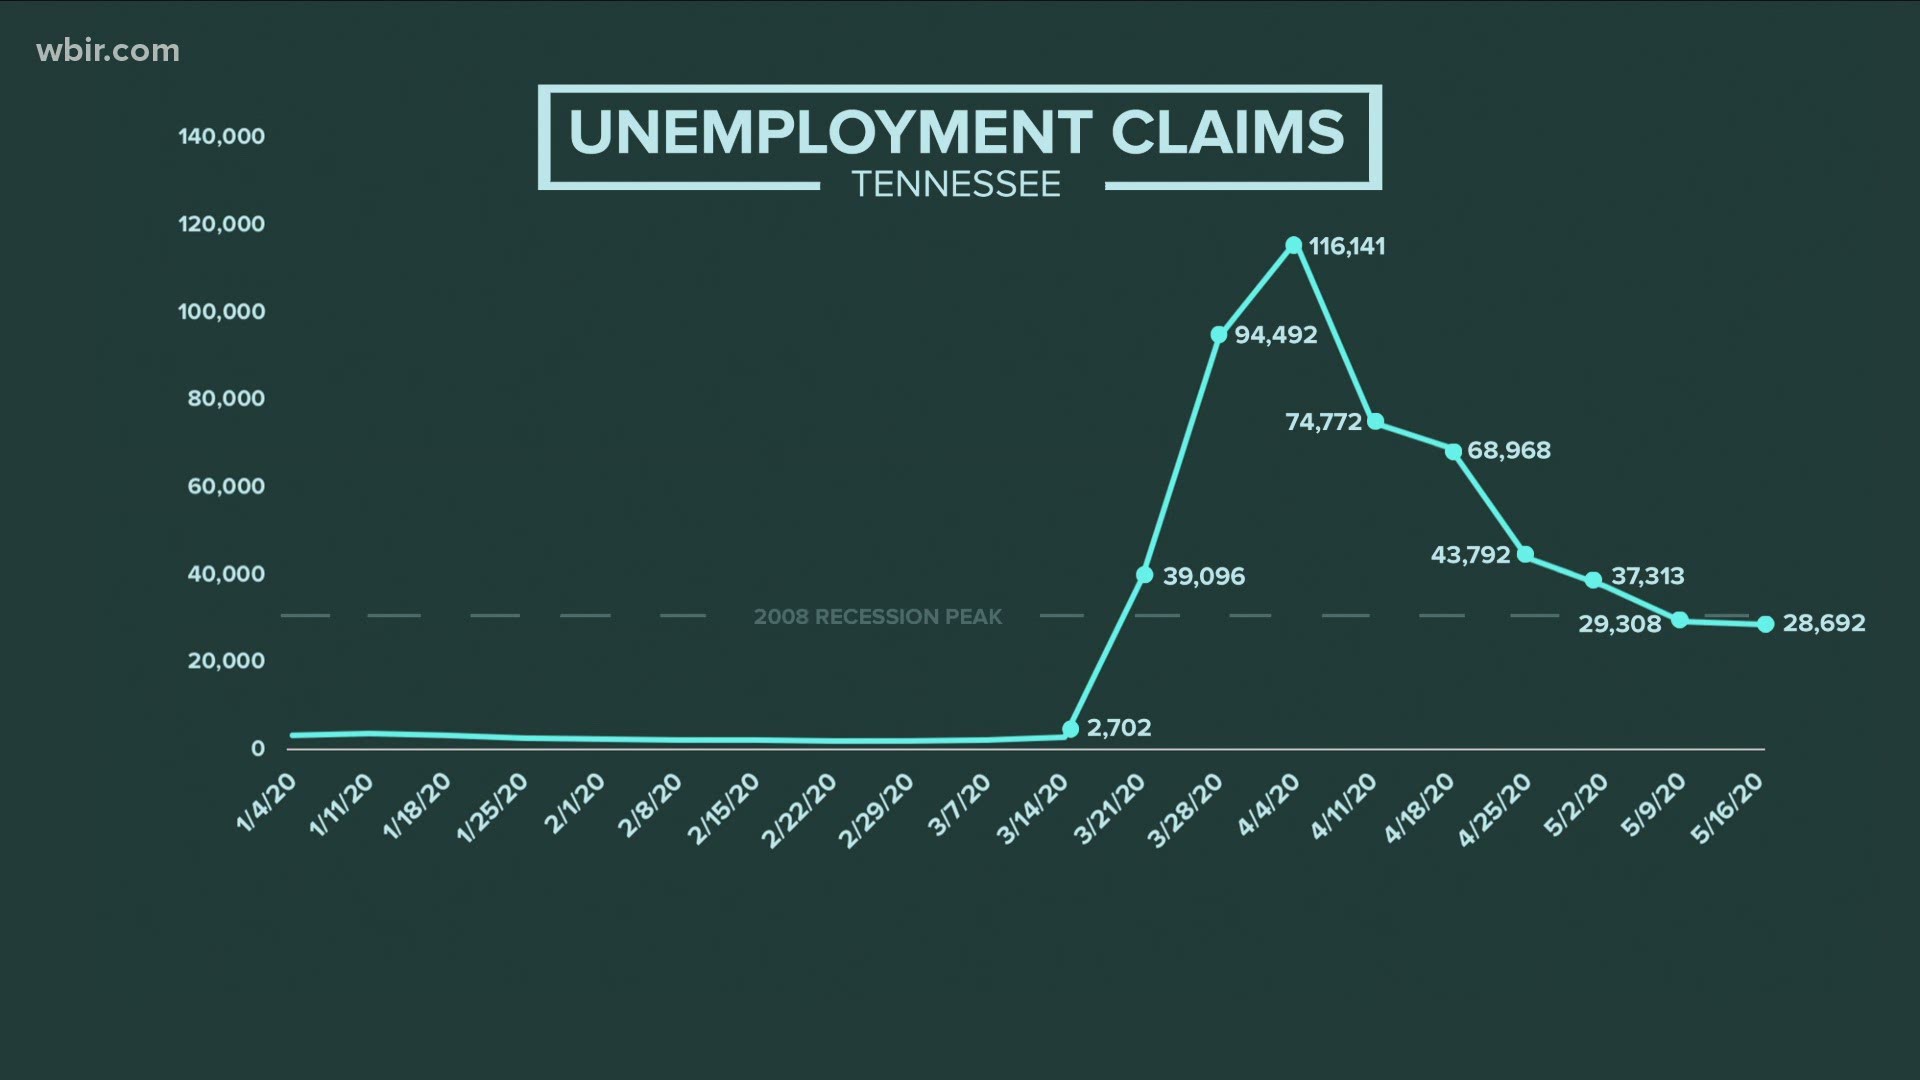 New unemployment numbers today will show the impact of COVID-19 on Tennessee's economy... and if reopening has started to help.